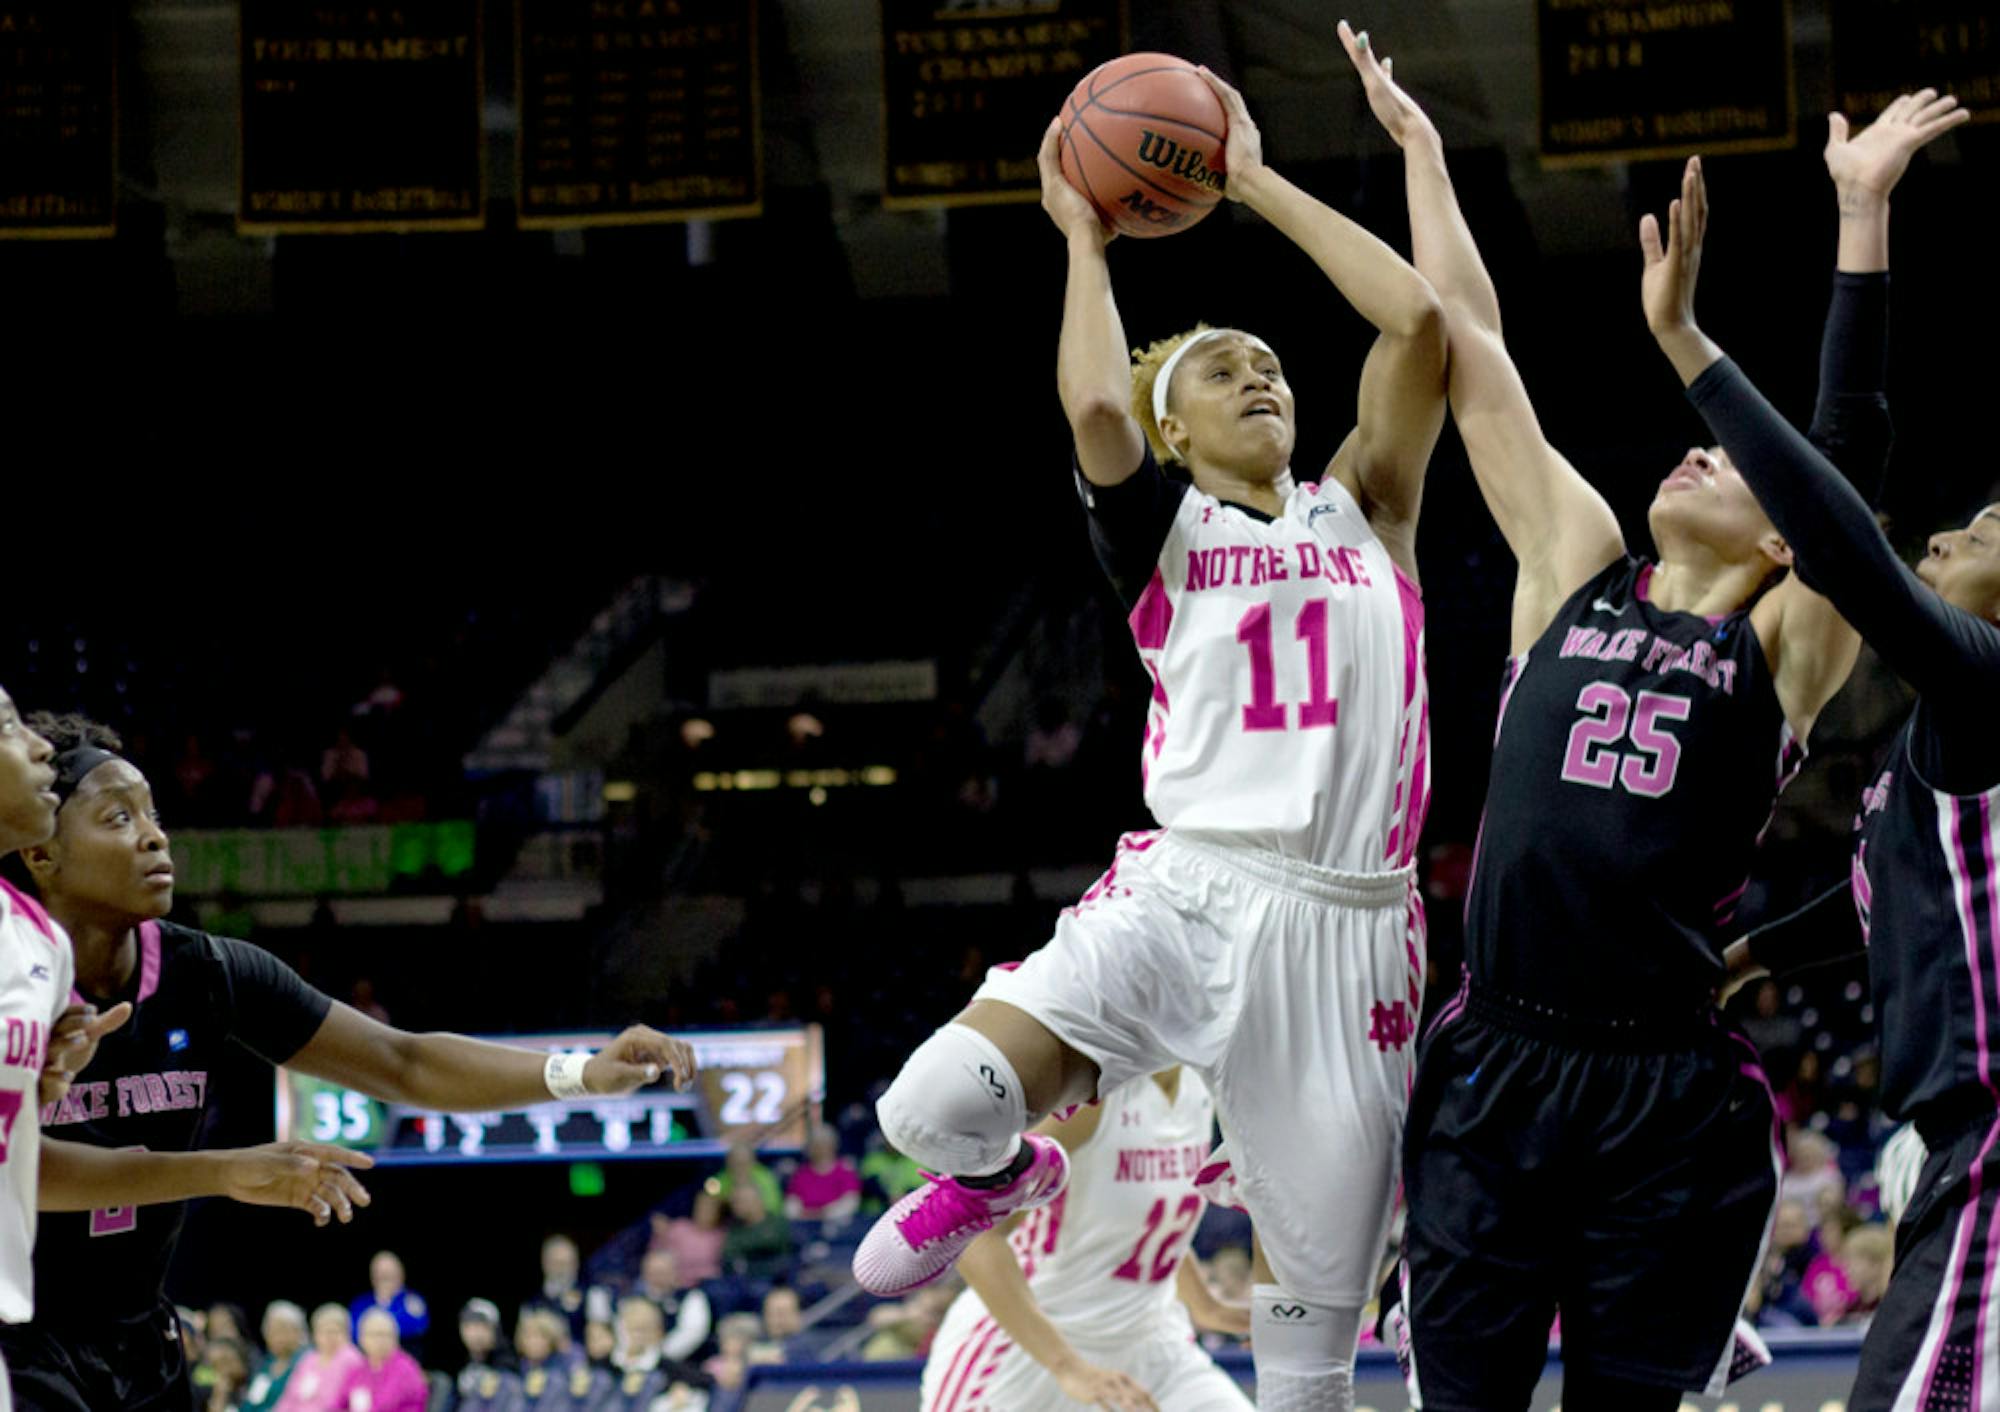 Notre Dame freshman forward Brianna Turner leaps to fire a contested shot over Wake Forest senior forward Dearica Hamby during a 92-63 Irish home victory over the Demon Deacons on Feb. 1.